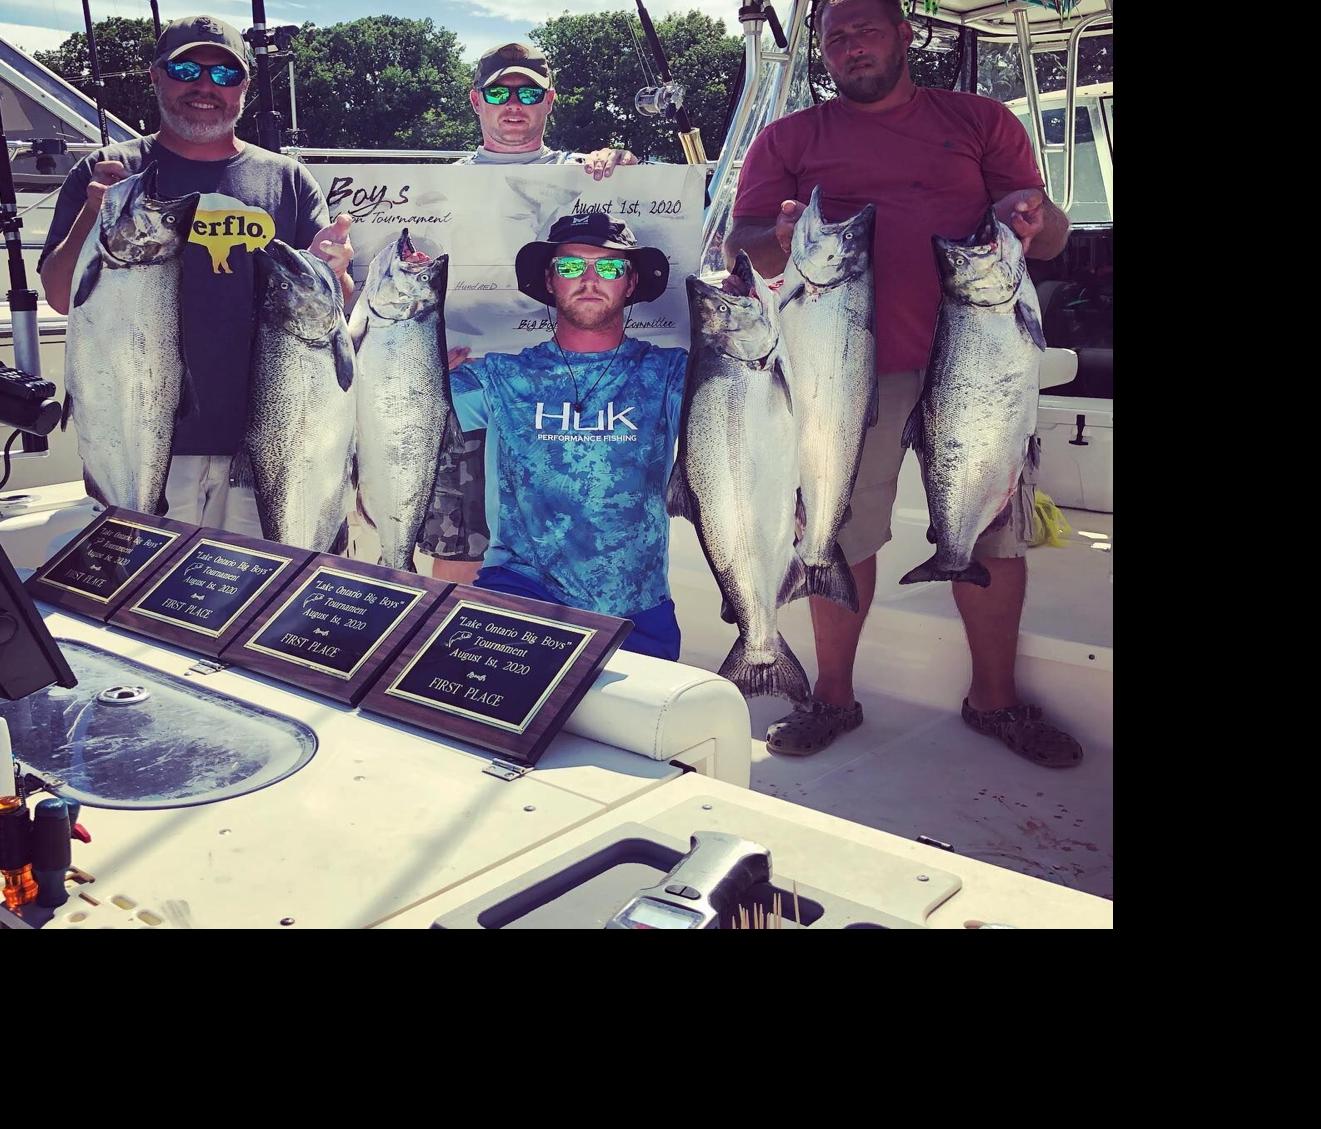 Dublin Up wins first Big Boys fishing tournament and other outdoors notes